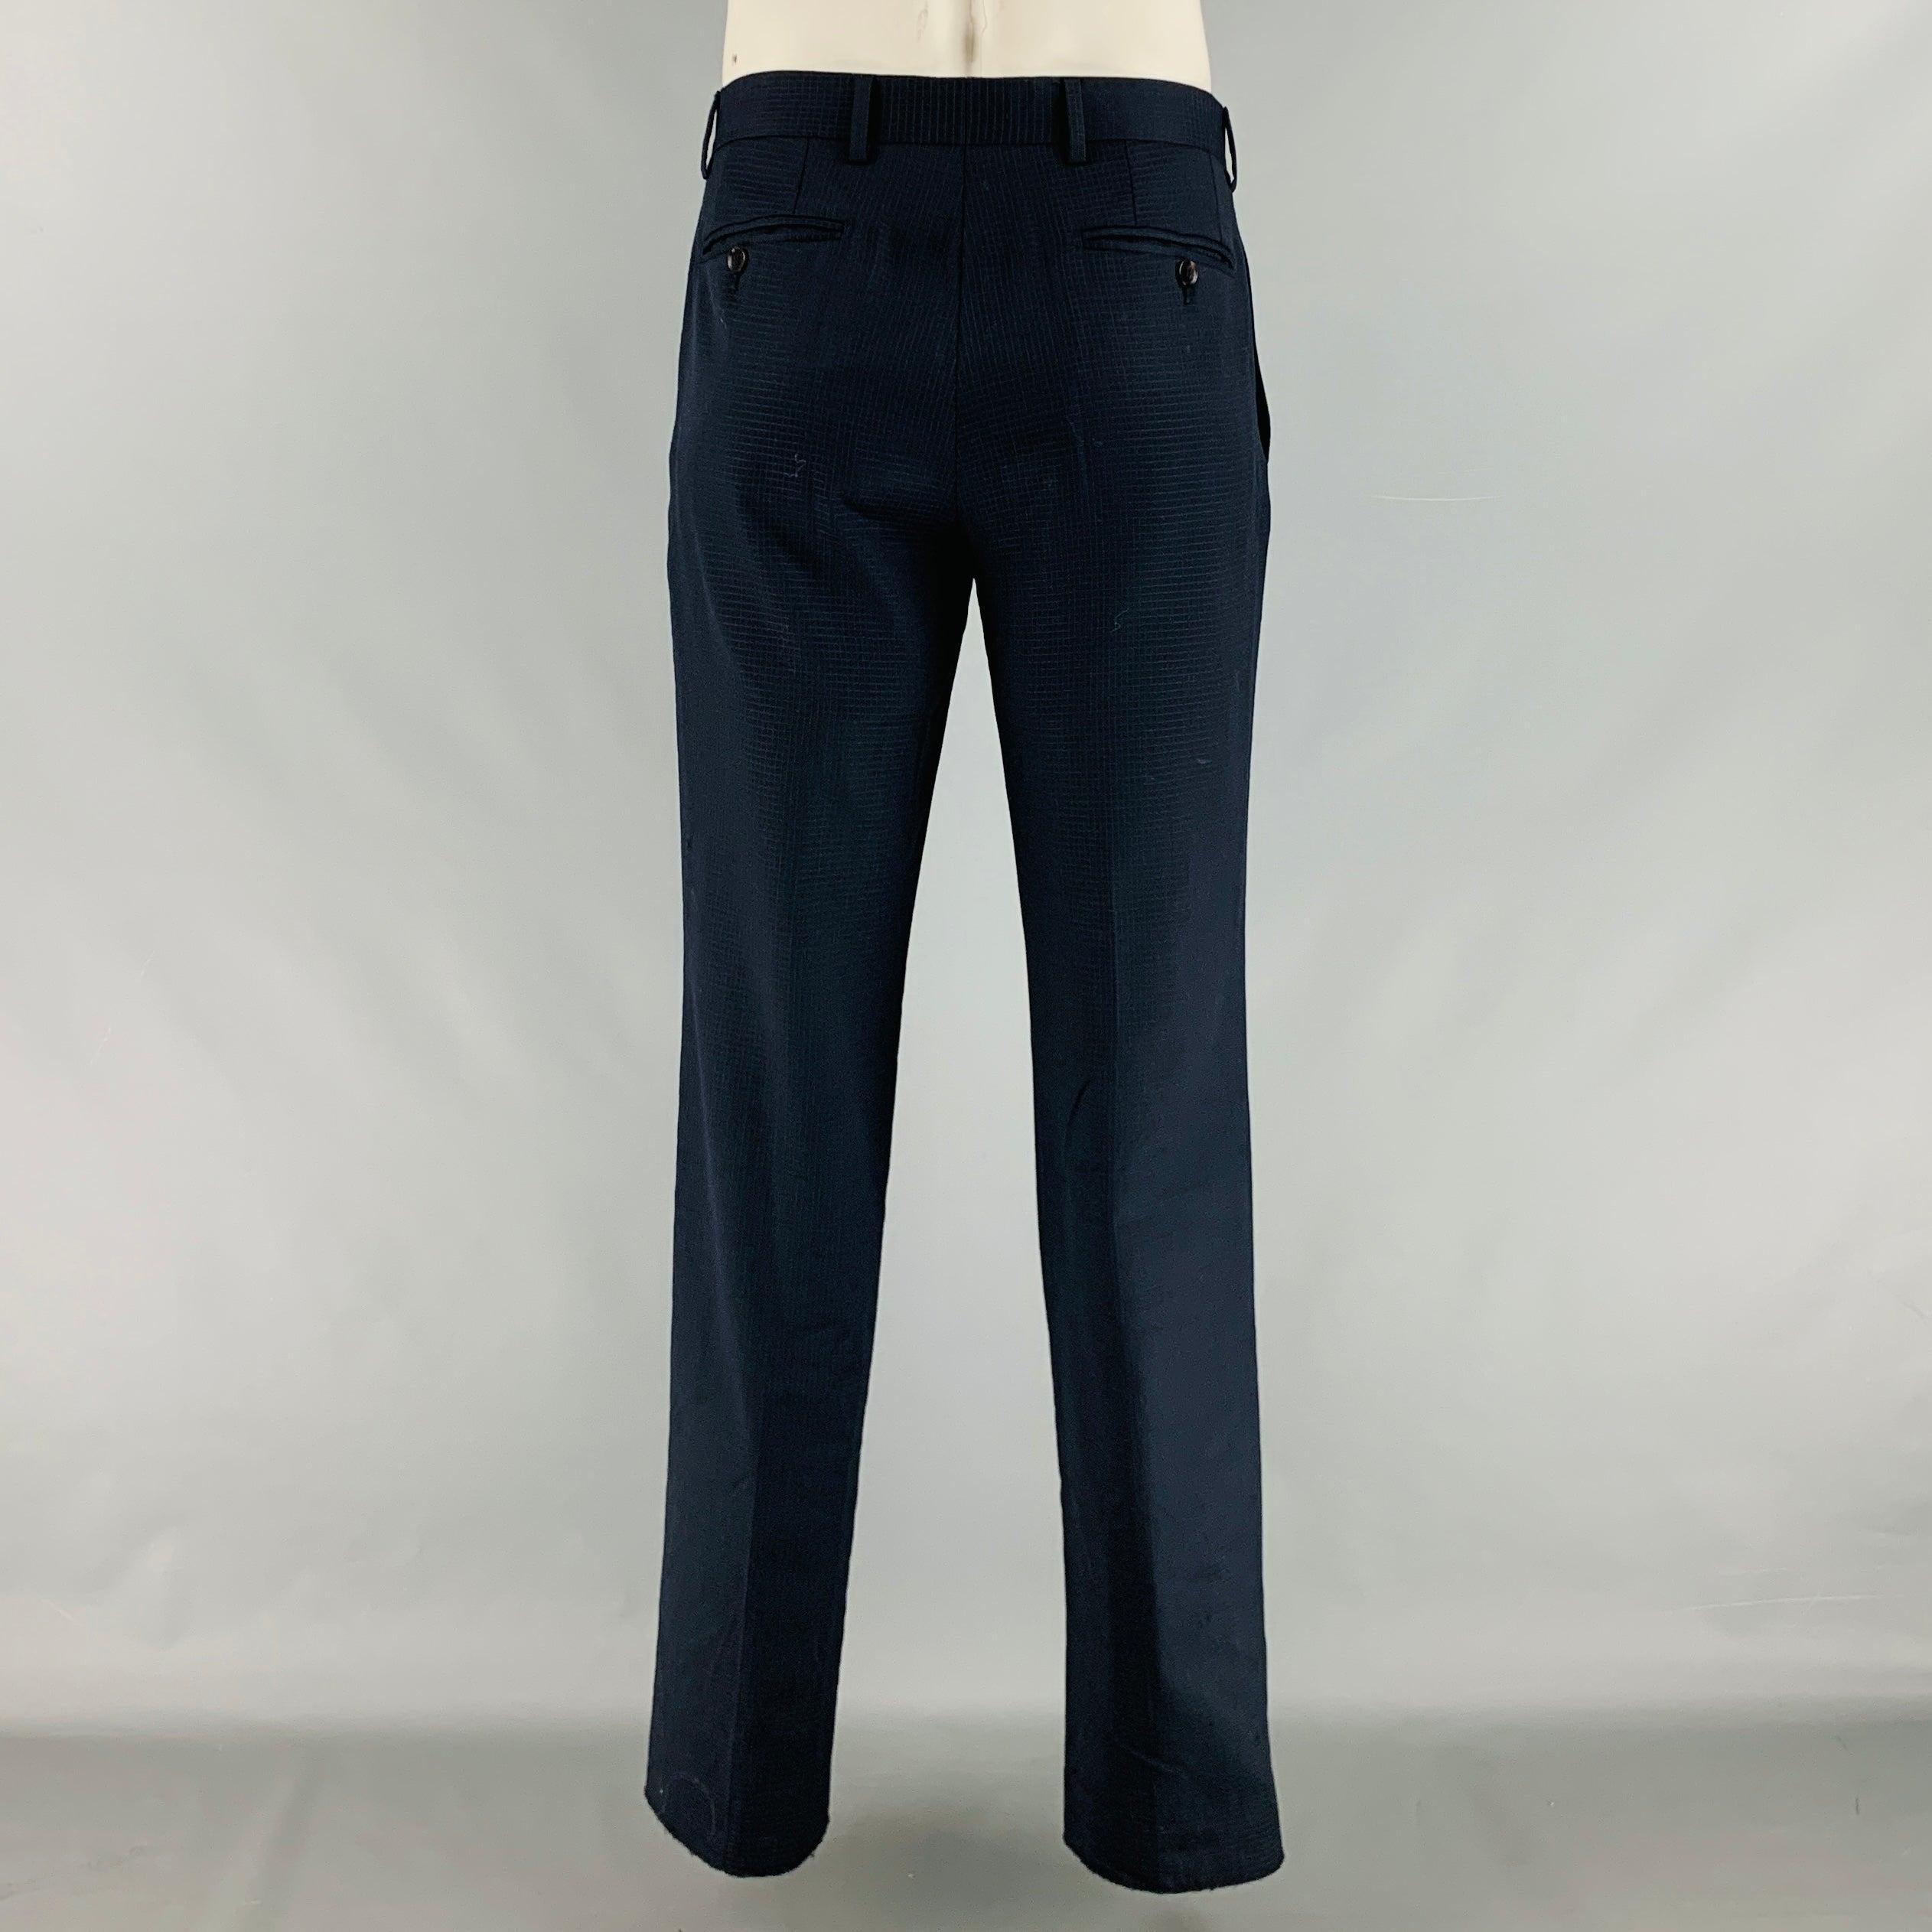 GUCCI Size 34 Navy Textured Wool Flat Front Casual Pants In Good Condition For Sale In San Francisco, CA